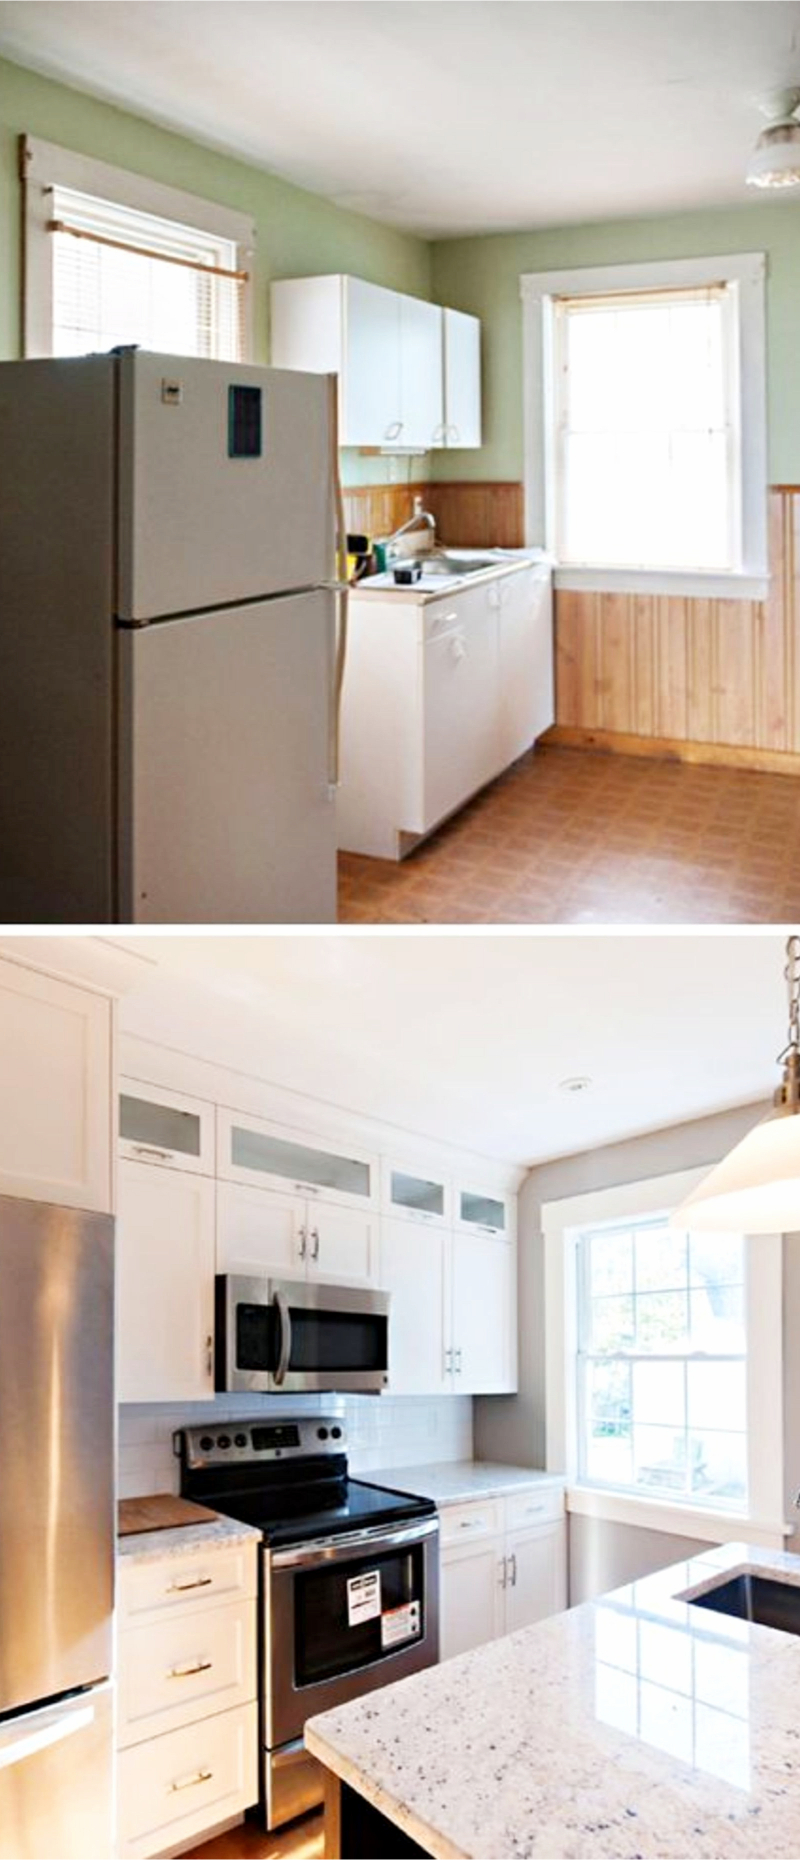 Small Kitchen Remodels Before And After Pictures To Drool Over